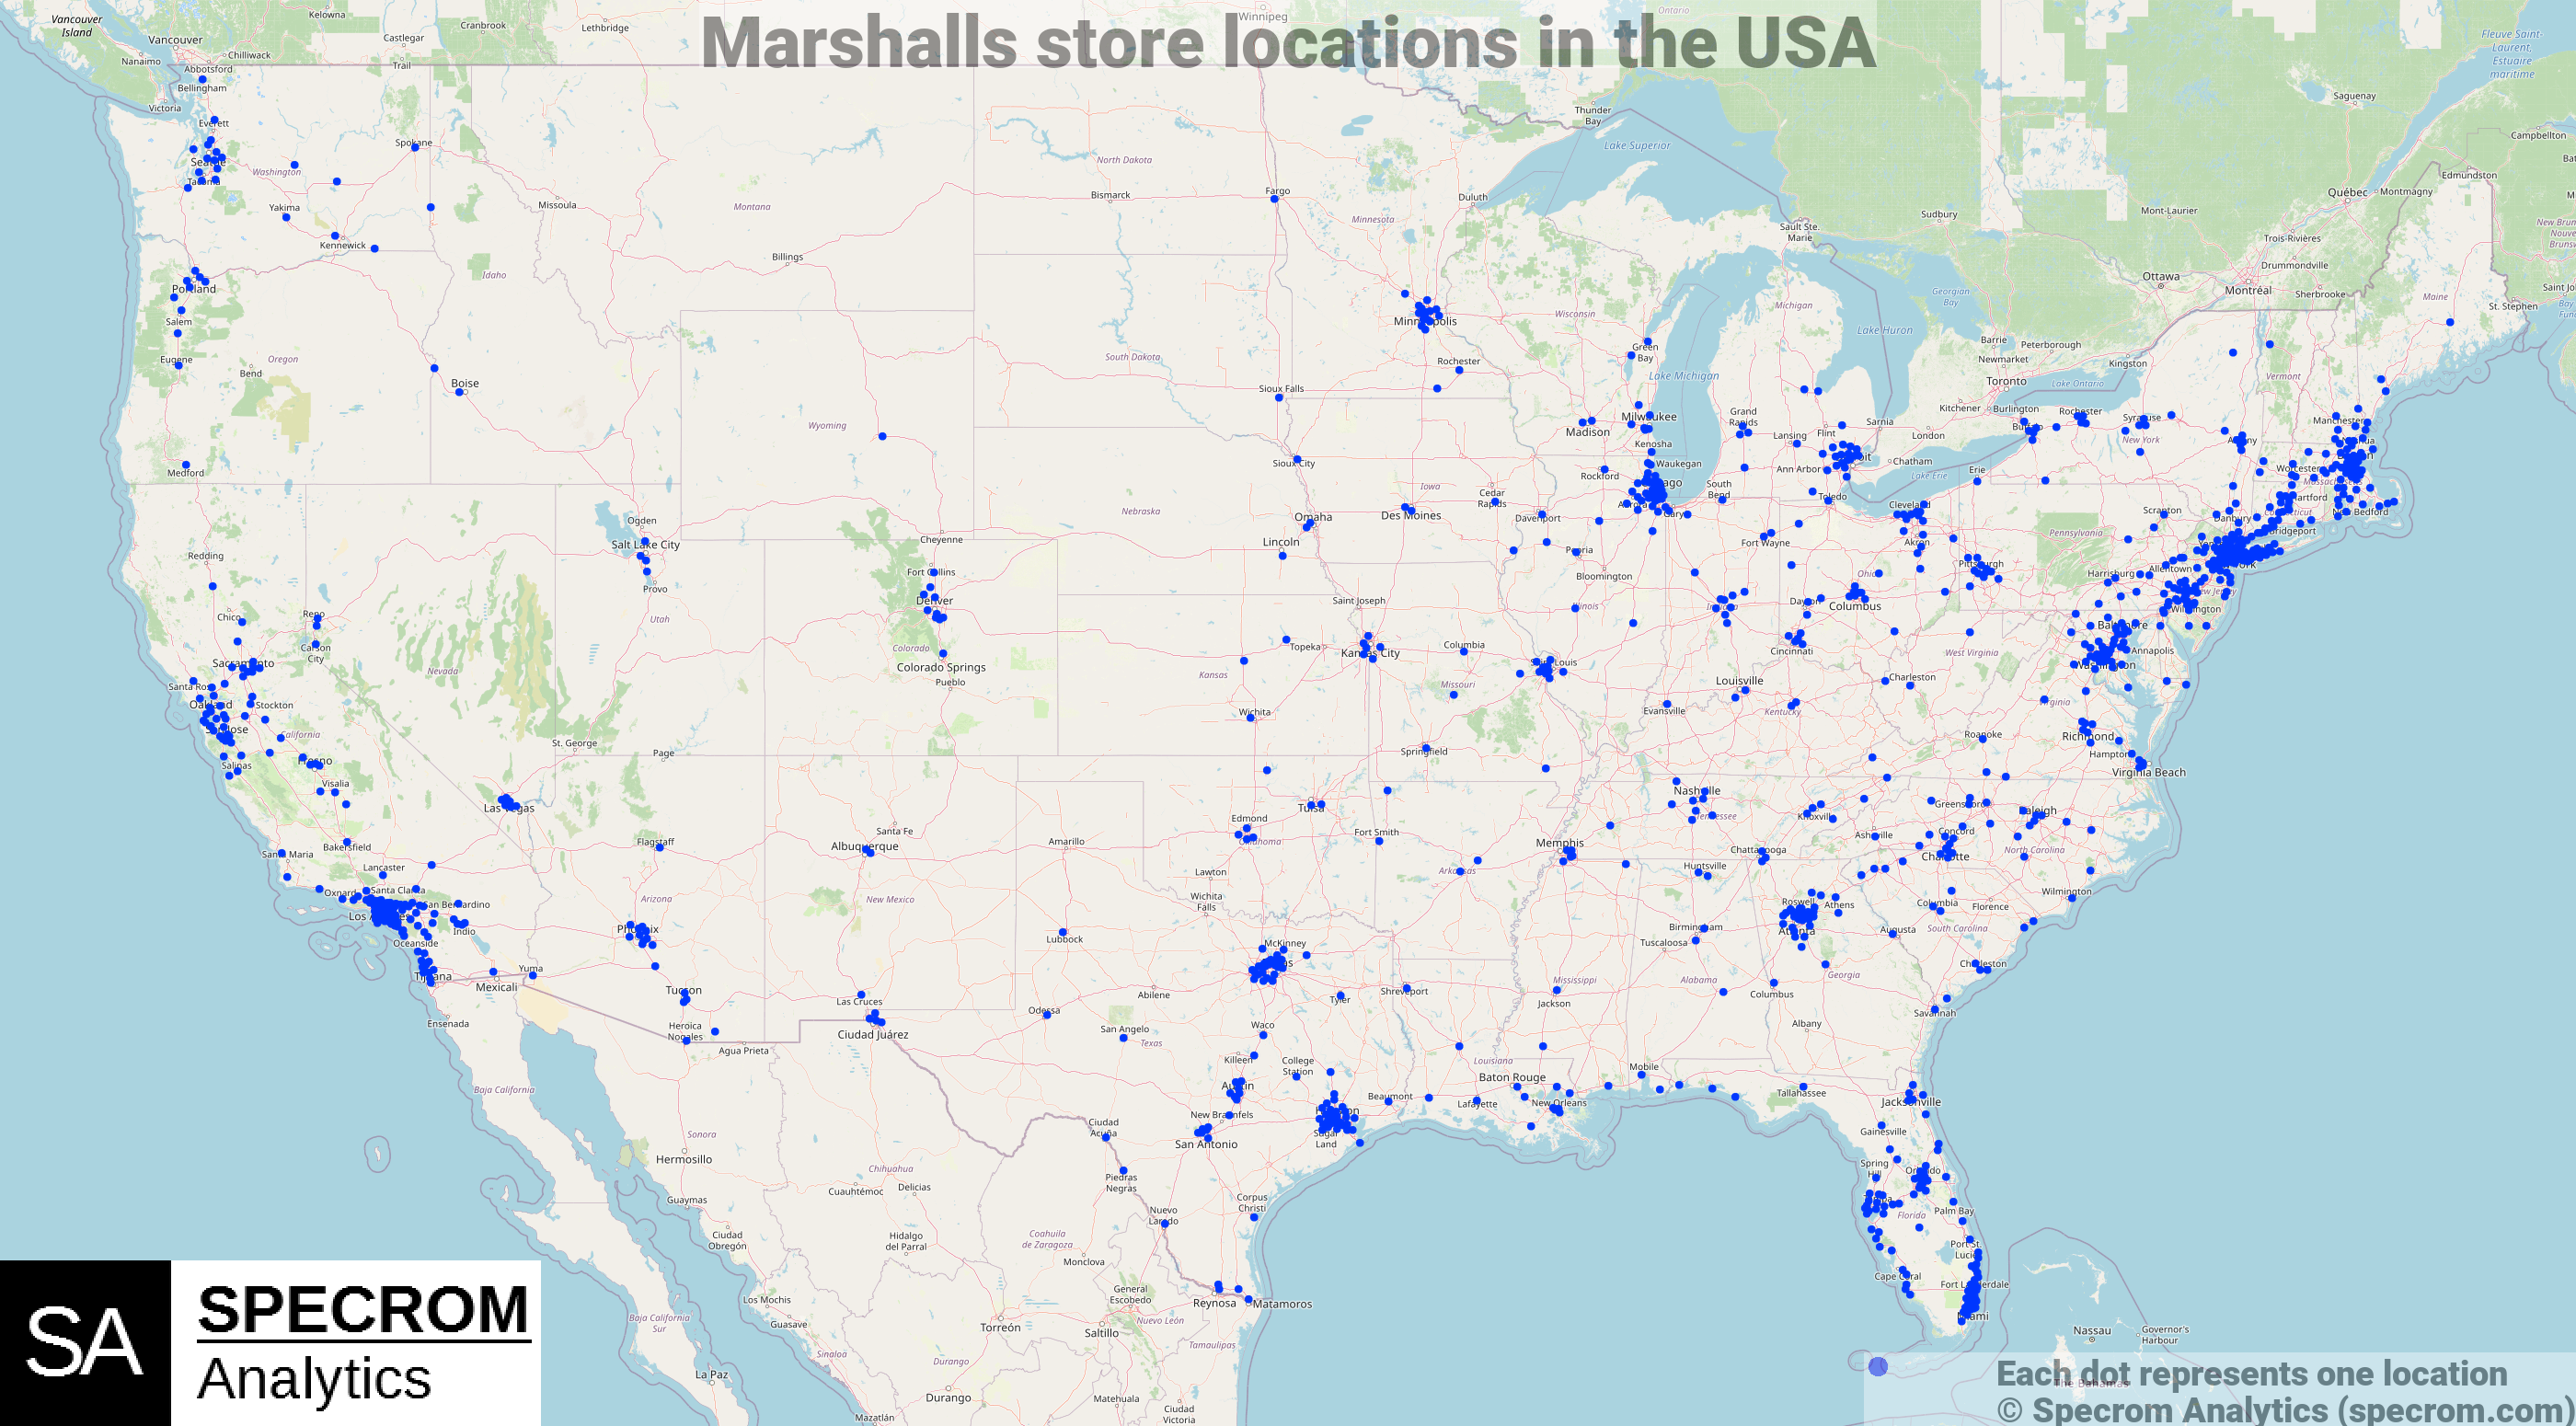 Marshalls store locations in the USA